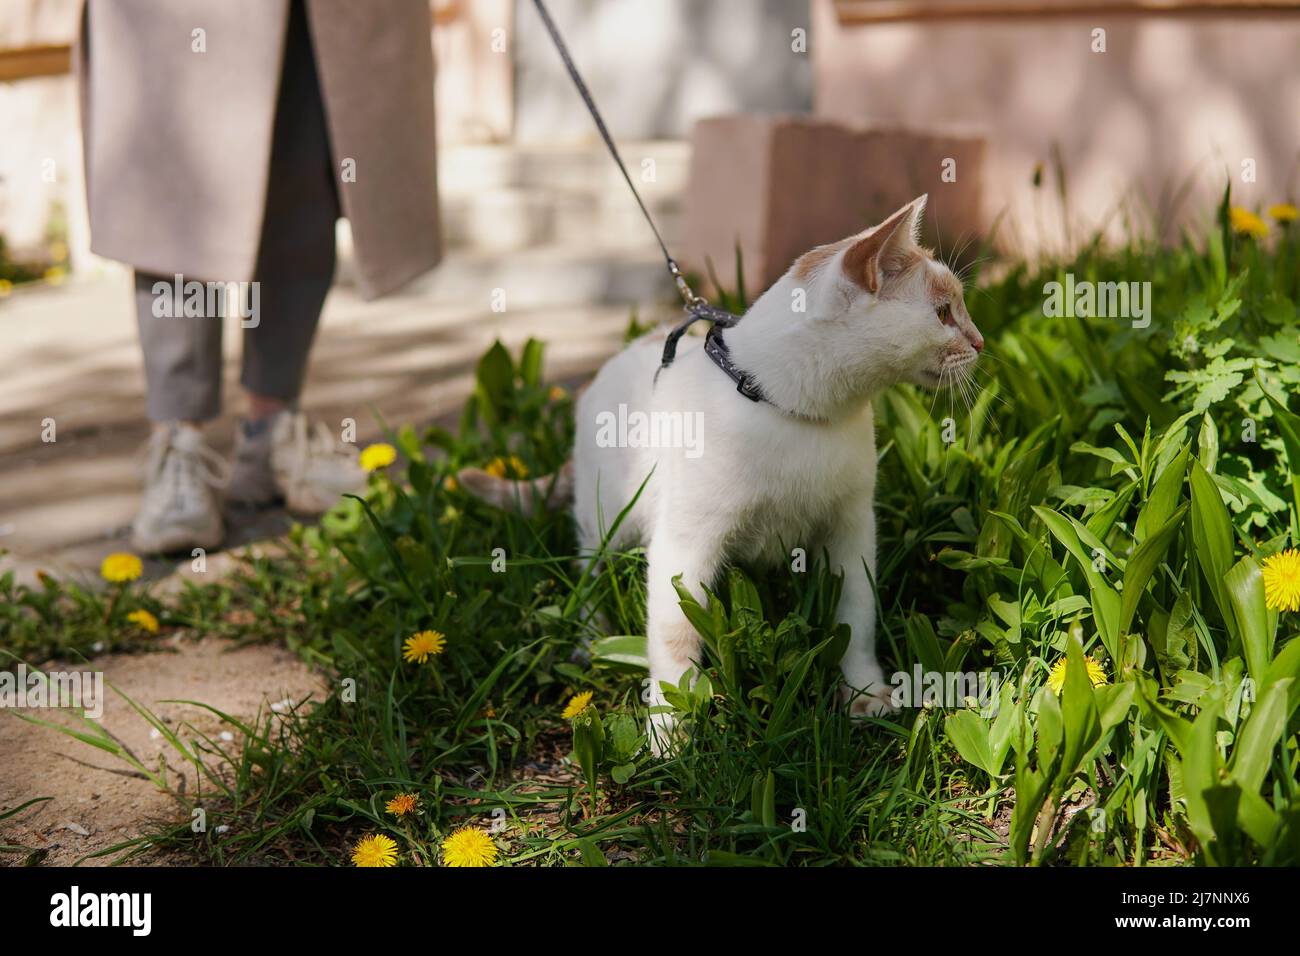 The owner and cat on a leash walking on a street. Stock Photo